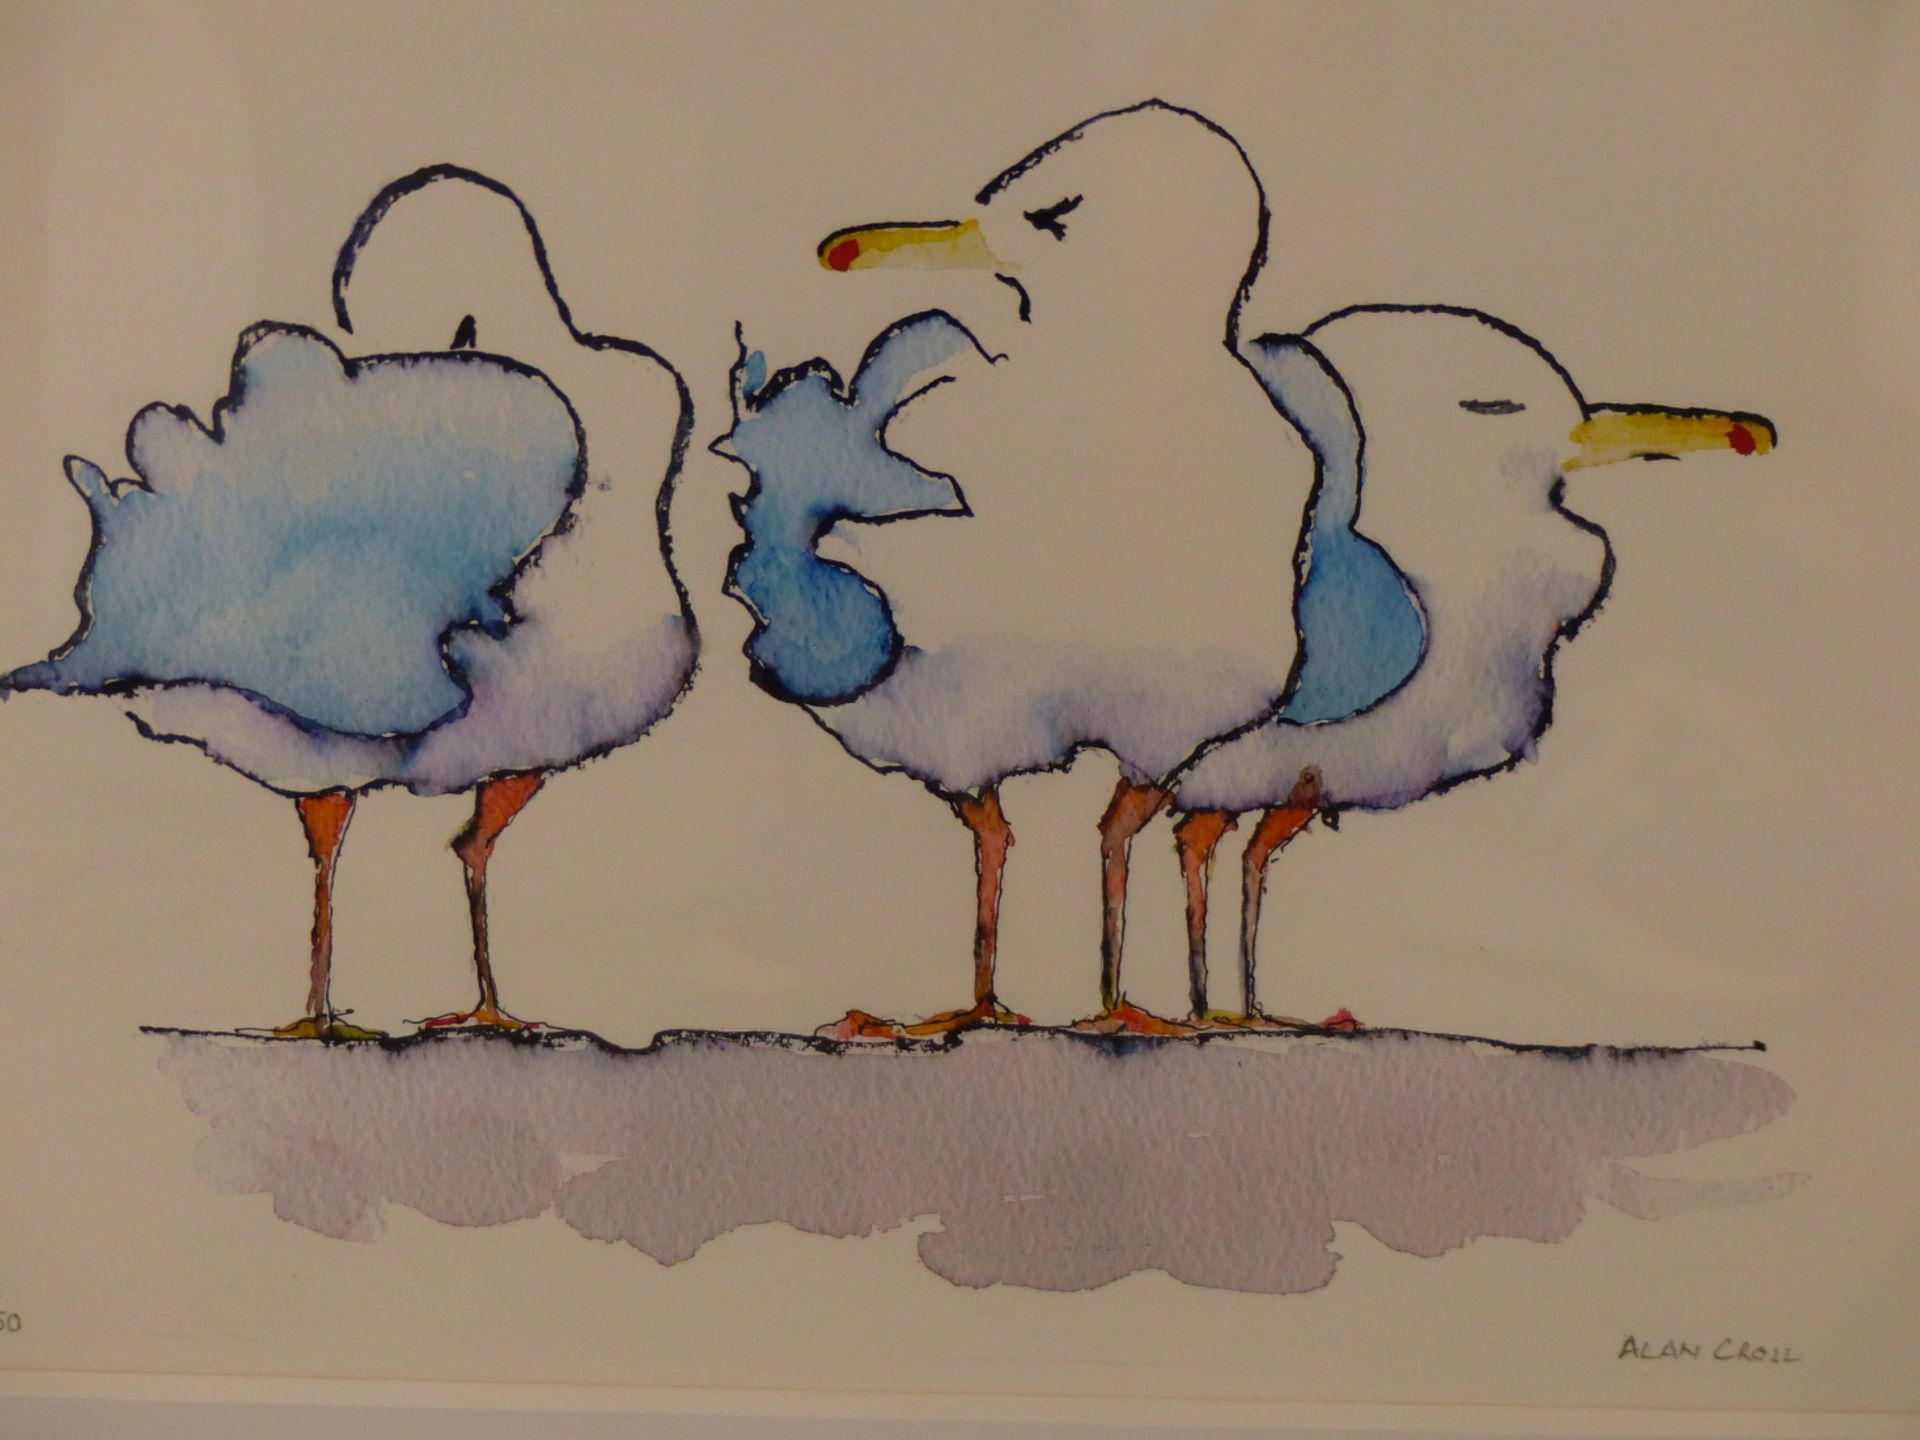 ALAN CROLL (20TH/21ST CENTURY), SEAGULLS, SIGNED AND NUMBERED 3/50 IN PENCIL, COLOUR PRINT, 38 X